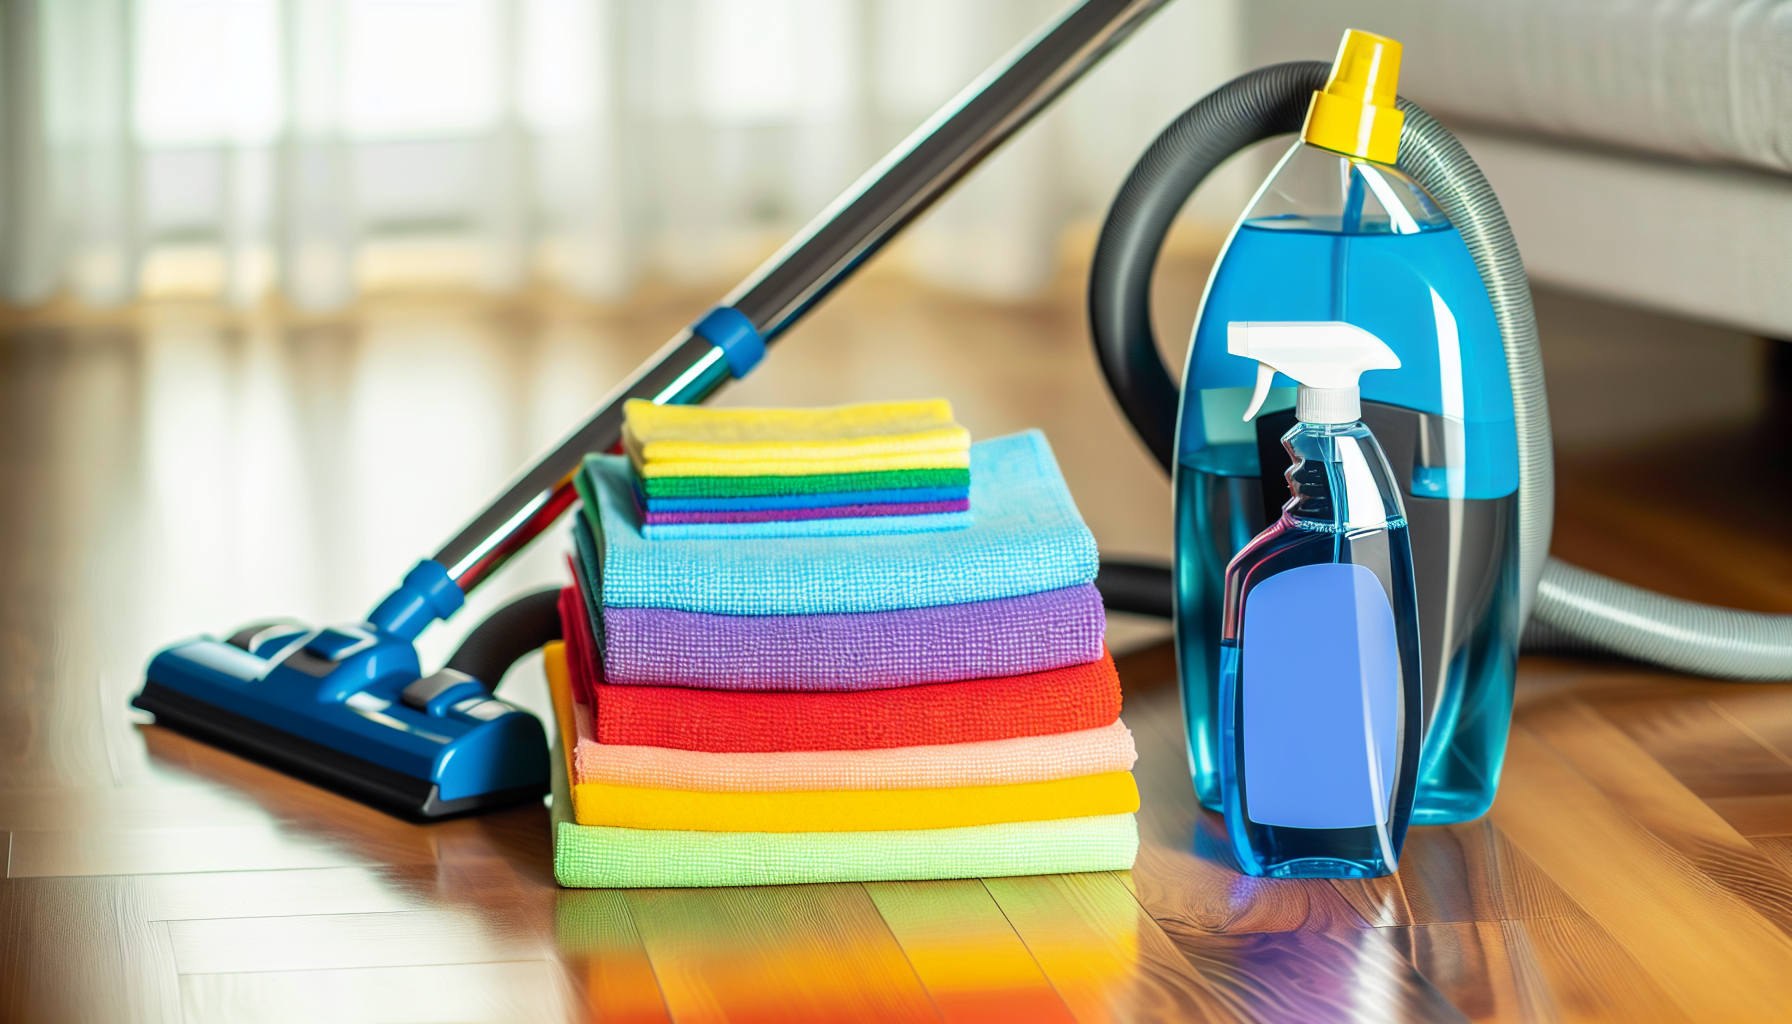 Assortment of cleaning supplies including microfiber cloths and vacuum cleaner